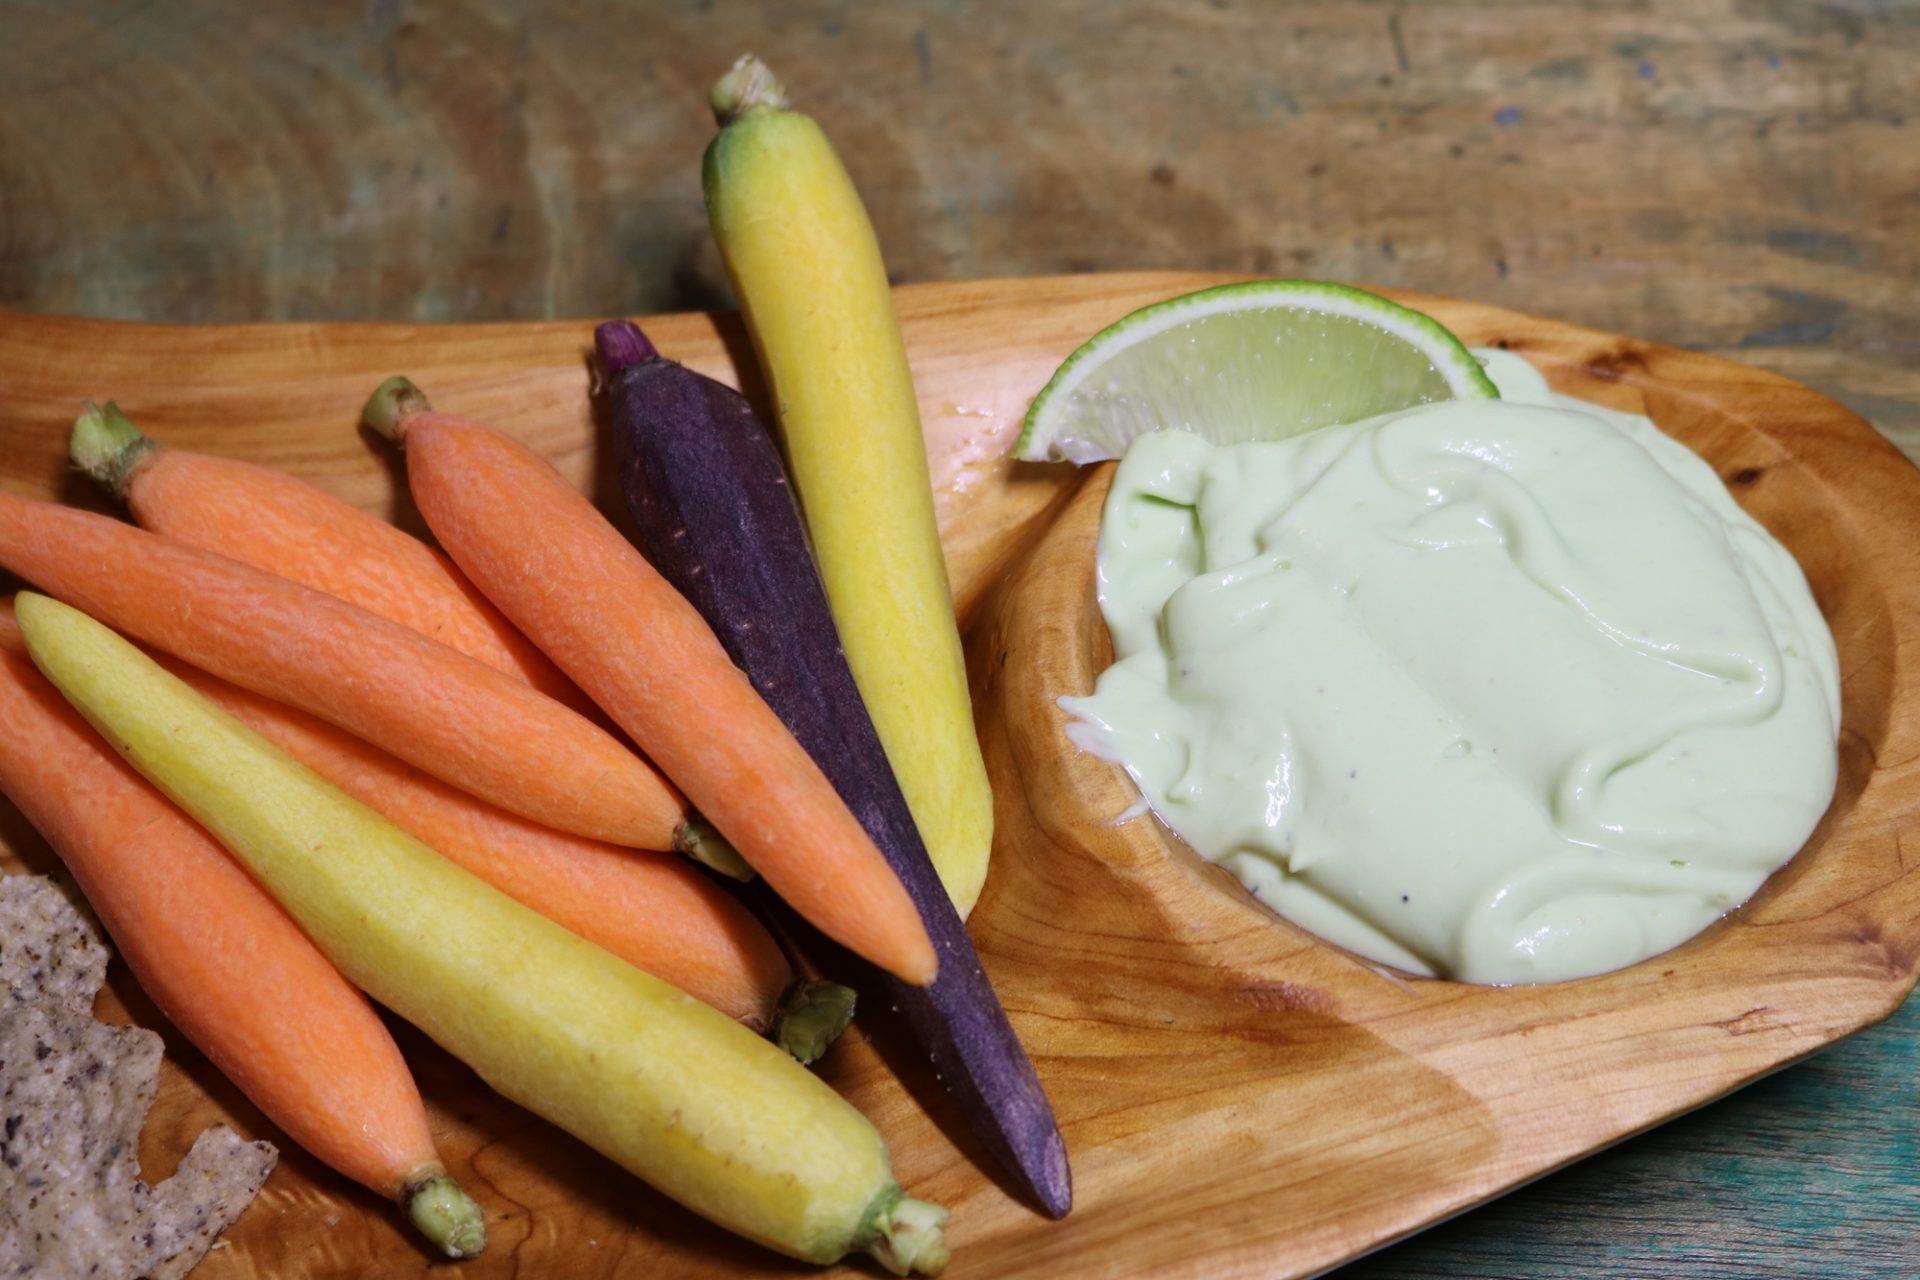 Avocado Crema - The simple topping that can turn an everyday meal into something magical! 5